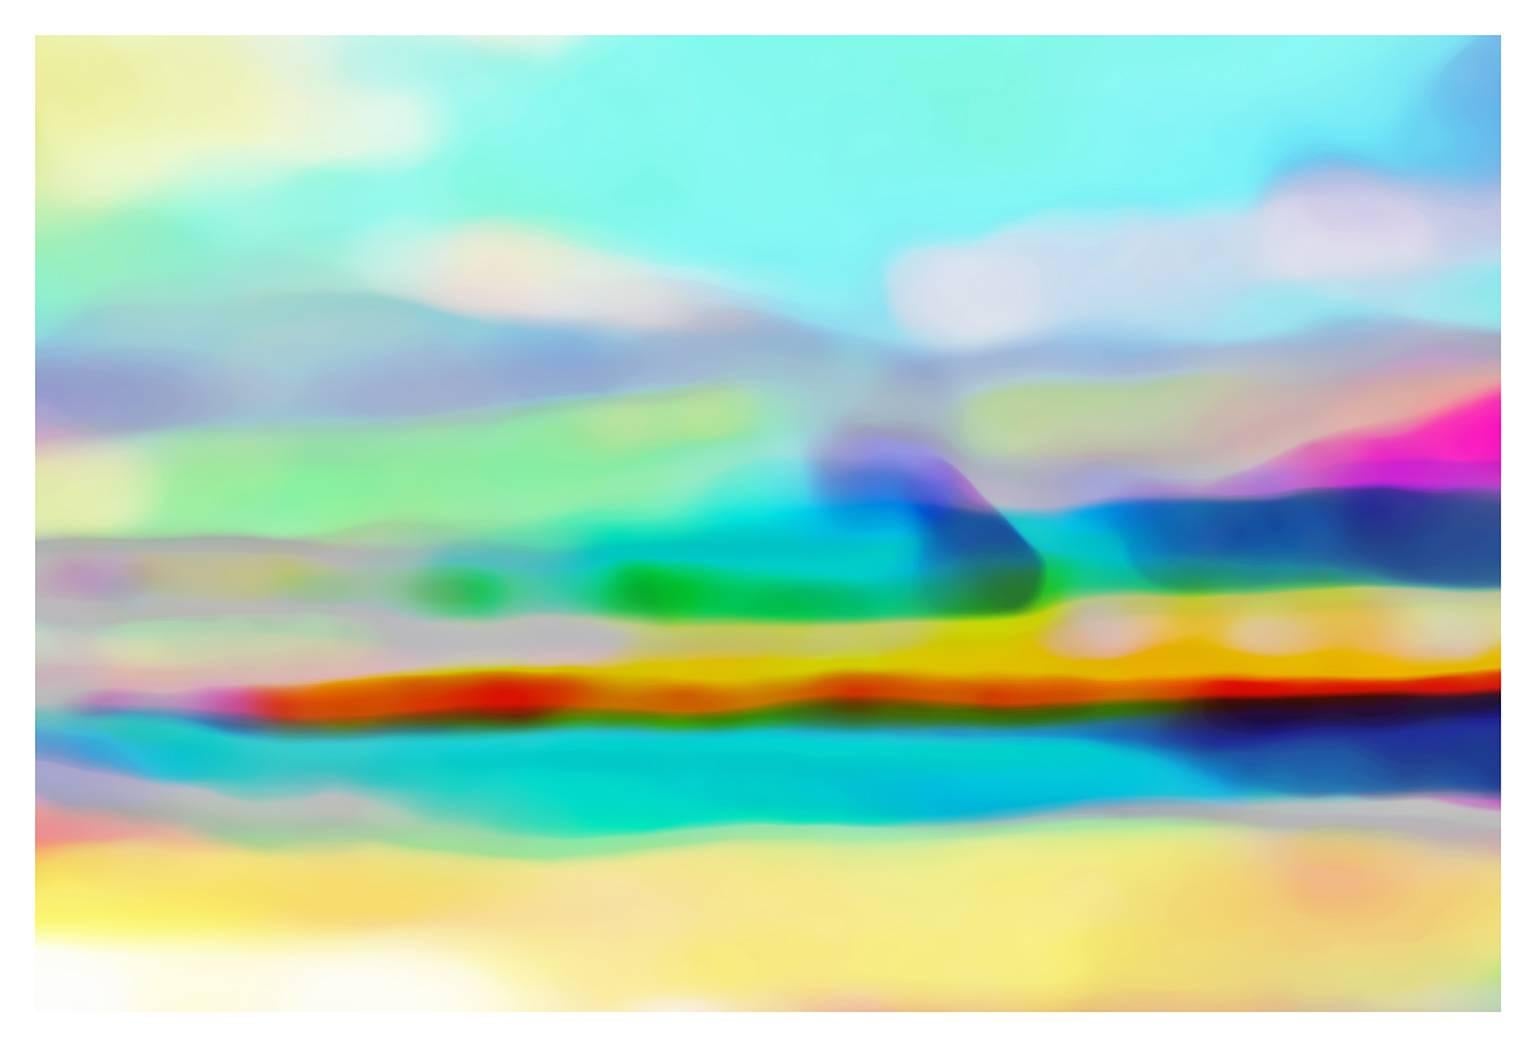 Cate Woodruff Abstract Photograph - "Melt" diffuses soft turquoise greens and yellows into a landscape of light